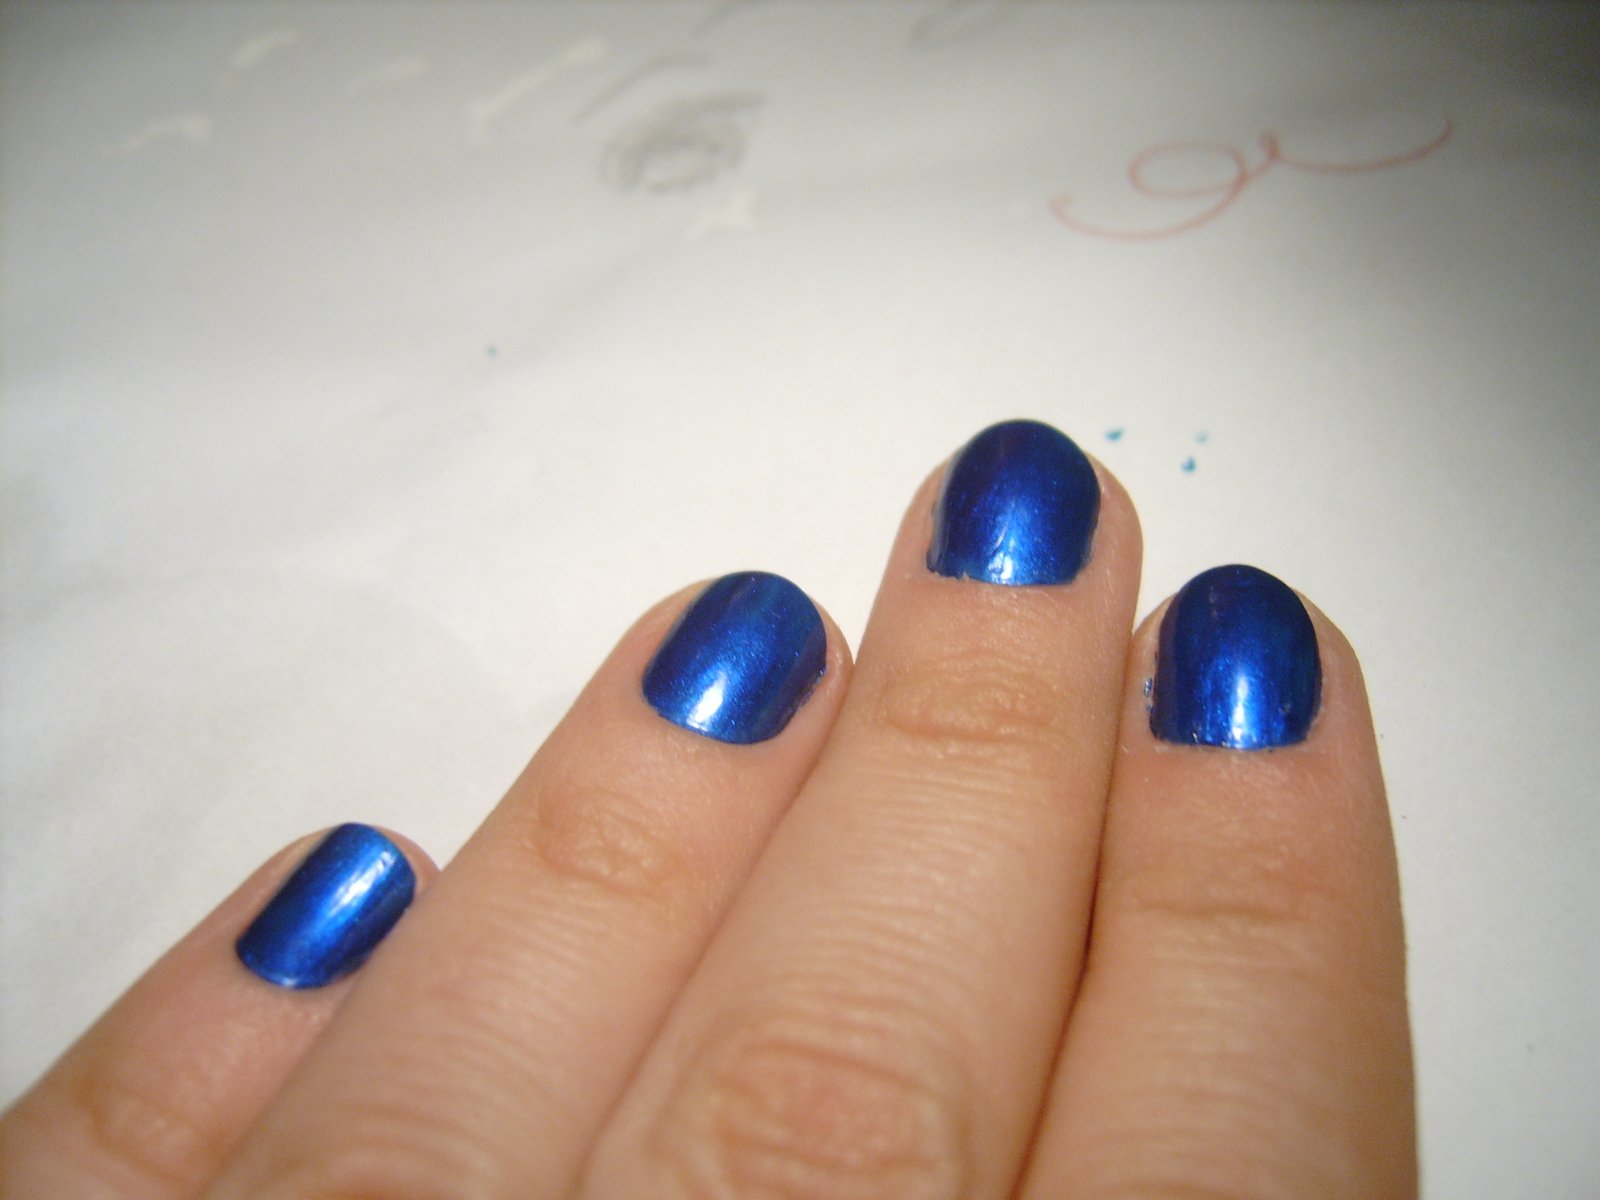 blue nail polish on a woman's finger with silver glitter